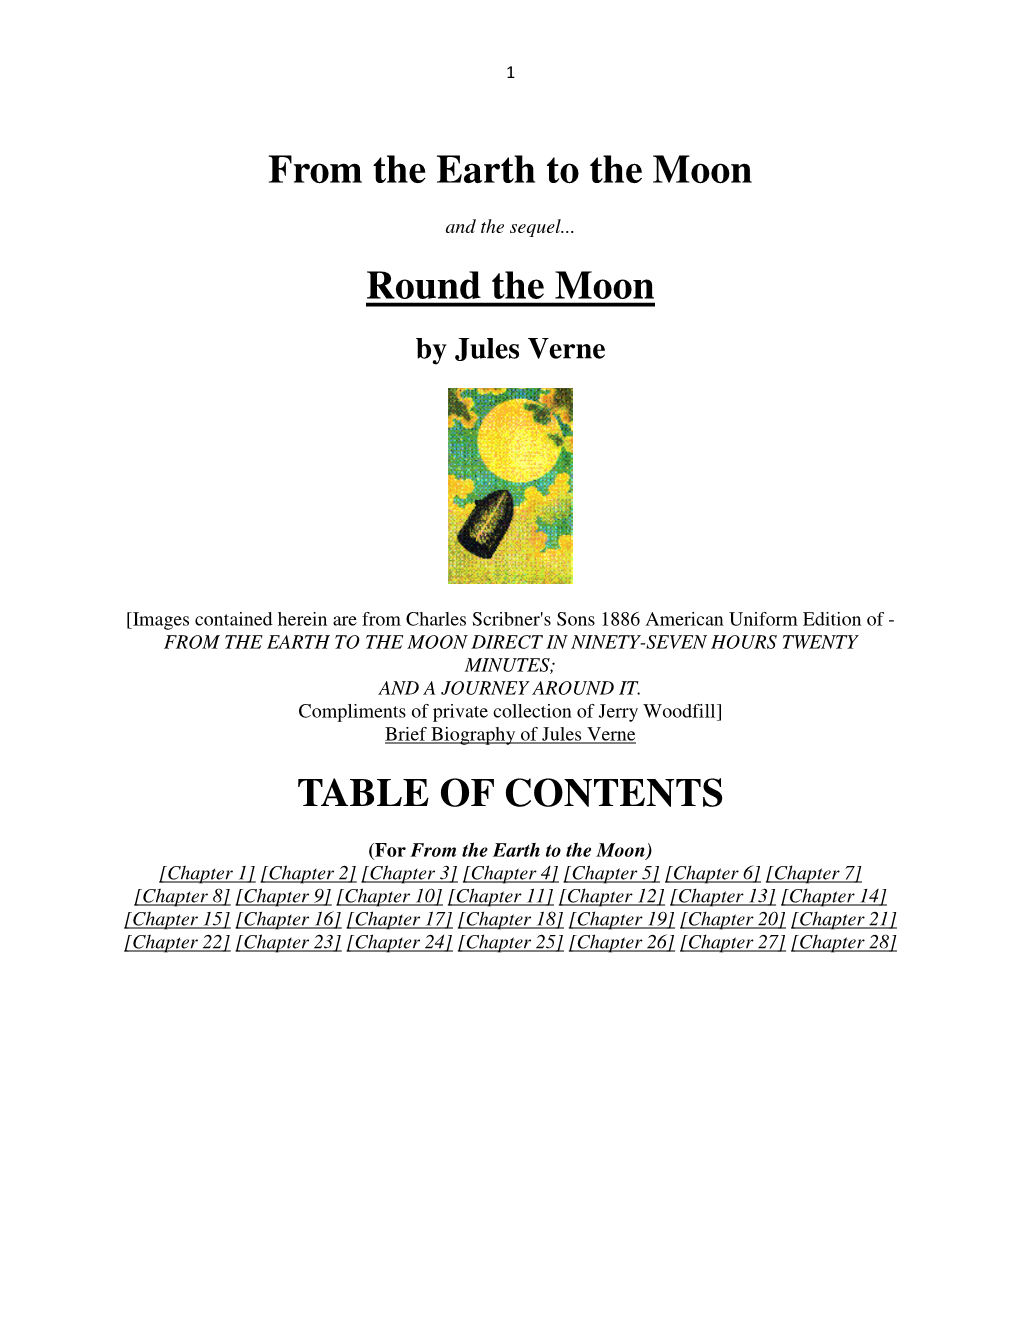 From the Earth to the Moon Round the Moon TABLE of CONTENTS